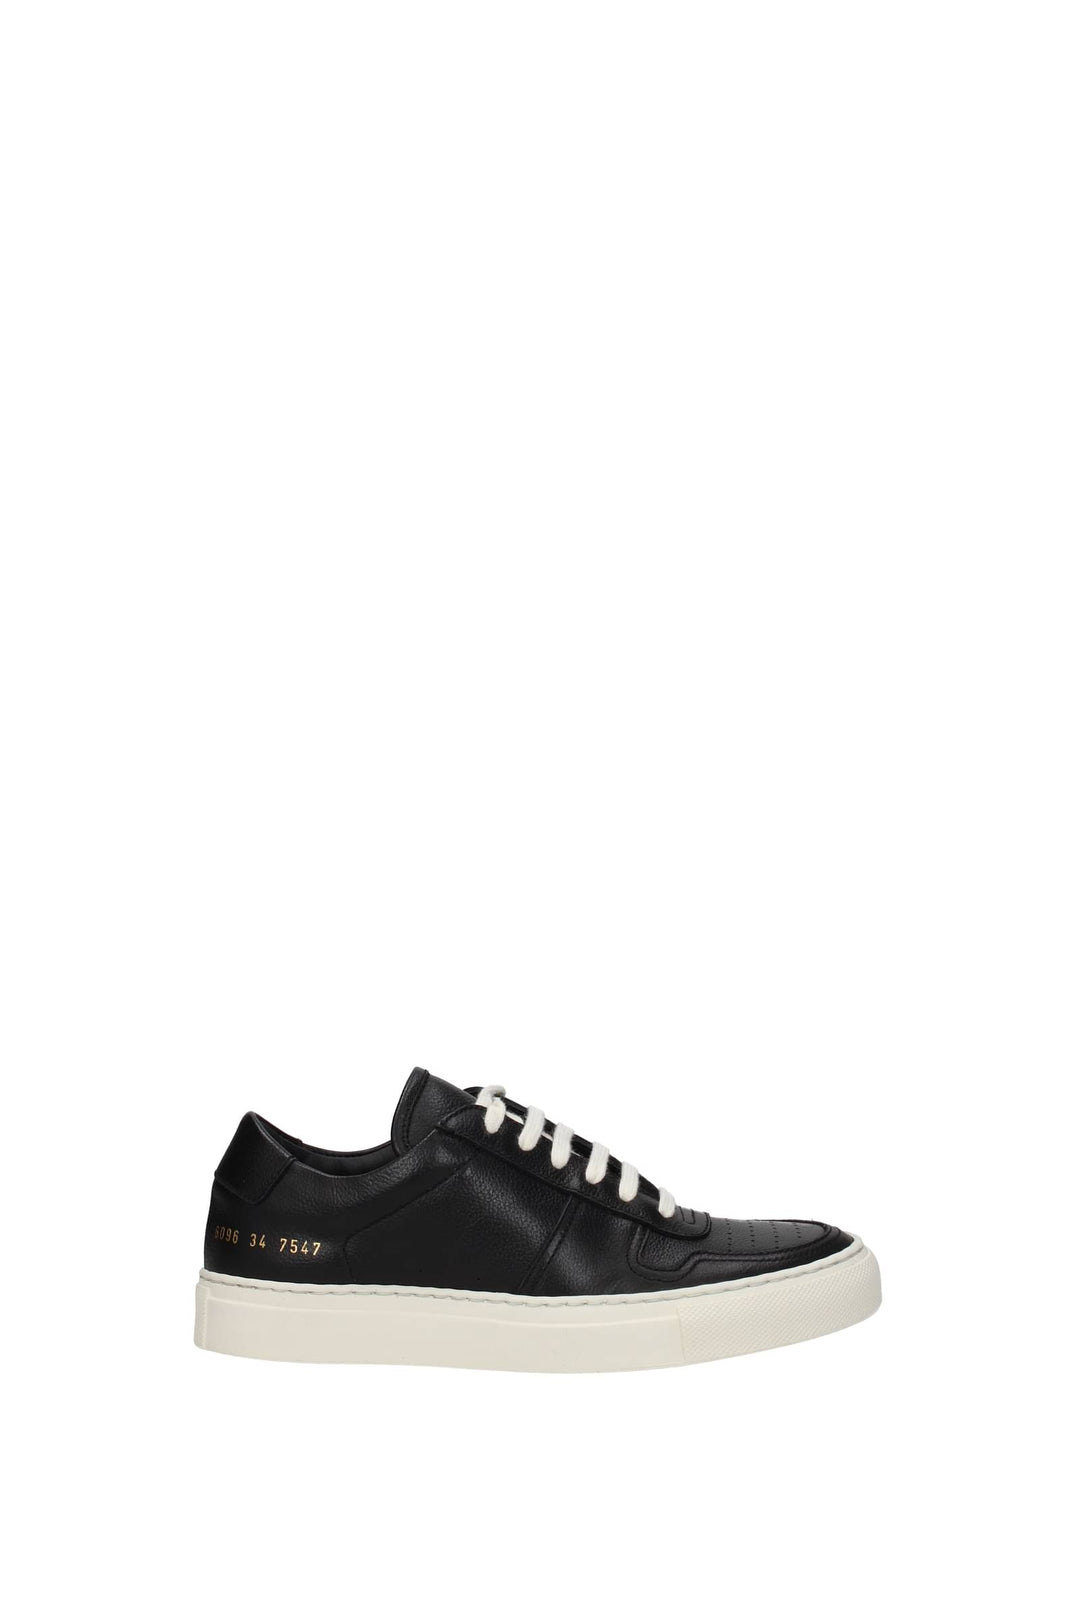 Sneakers Bball Pelle Nero - Common Projects - Donna